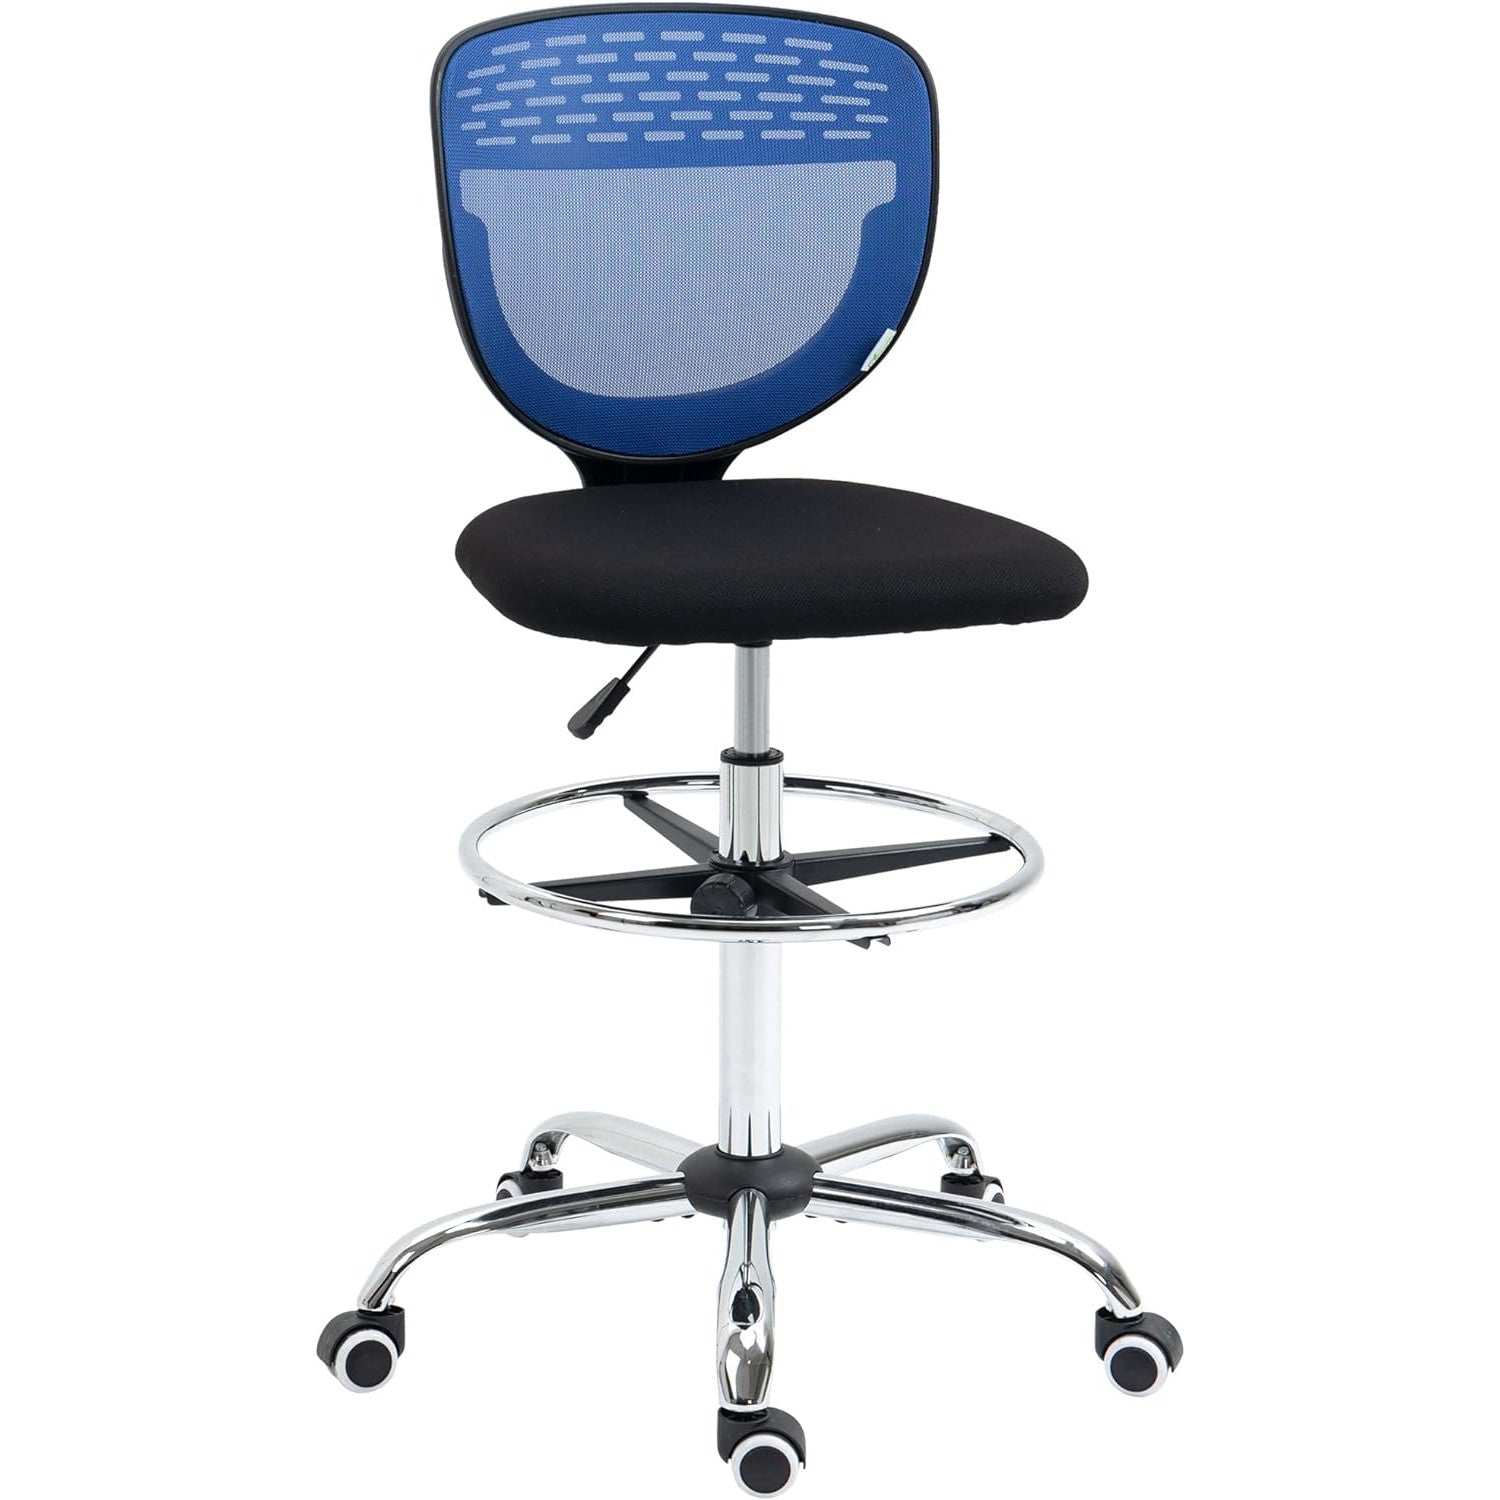 ProperAV Extra Armless Mesh Office Draughtsman Chair with Lumbar Support & Adjustable Foot Ring (Blue)